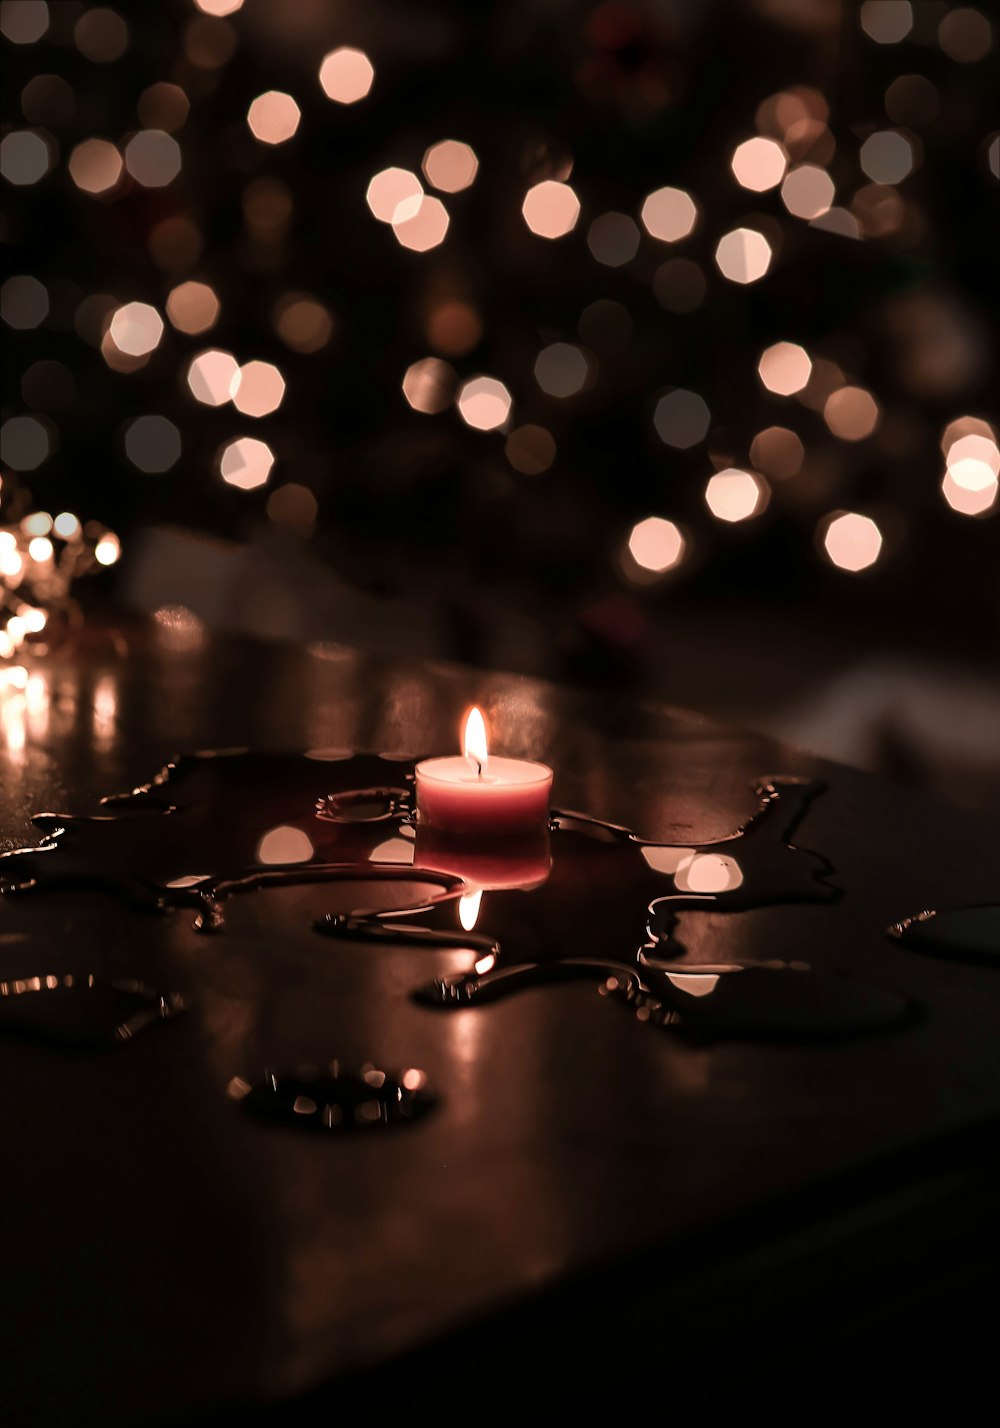 30,000+ Candle Dark Pictures | Download Free Images on Unsplash